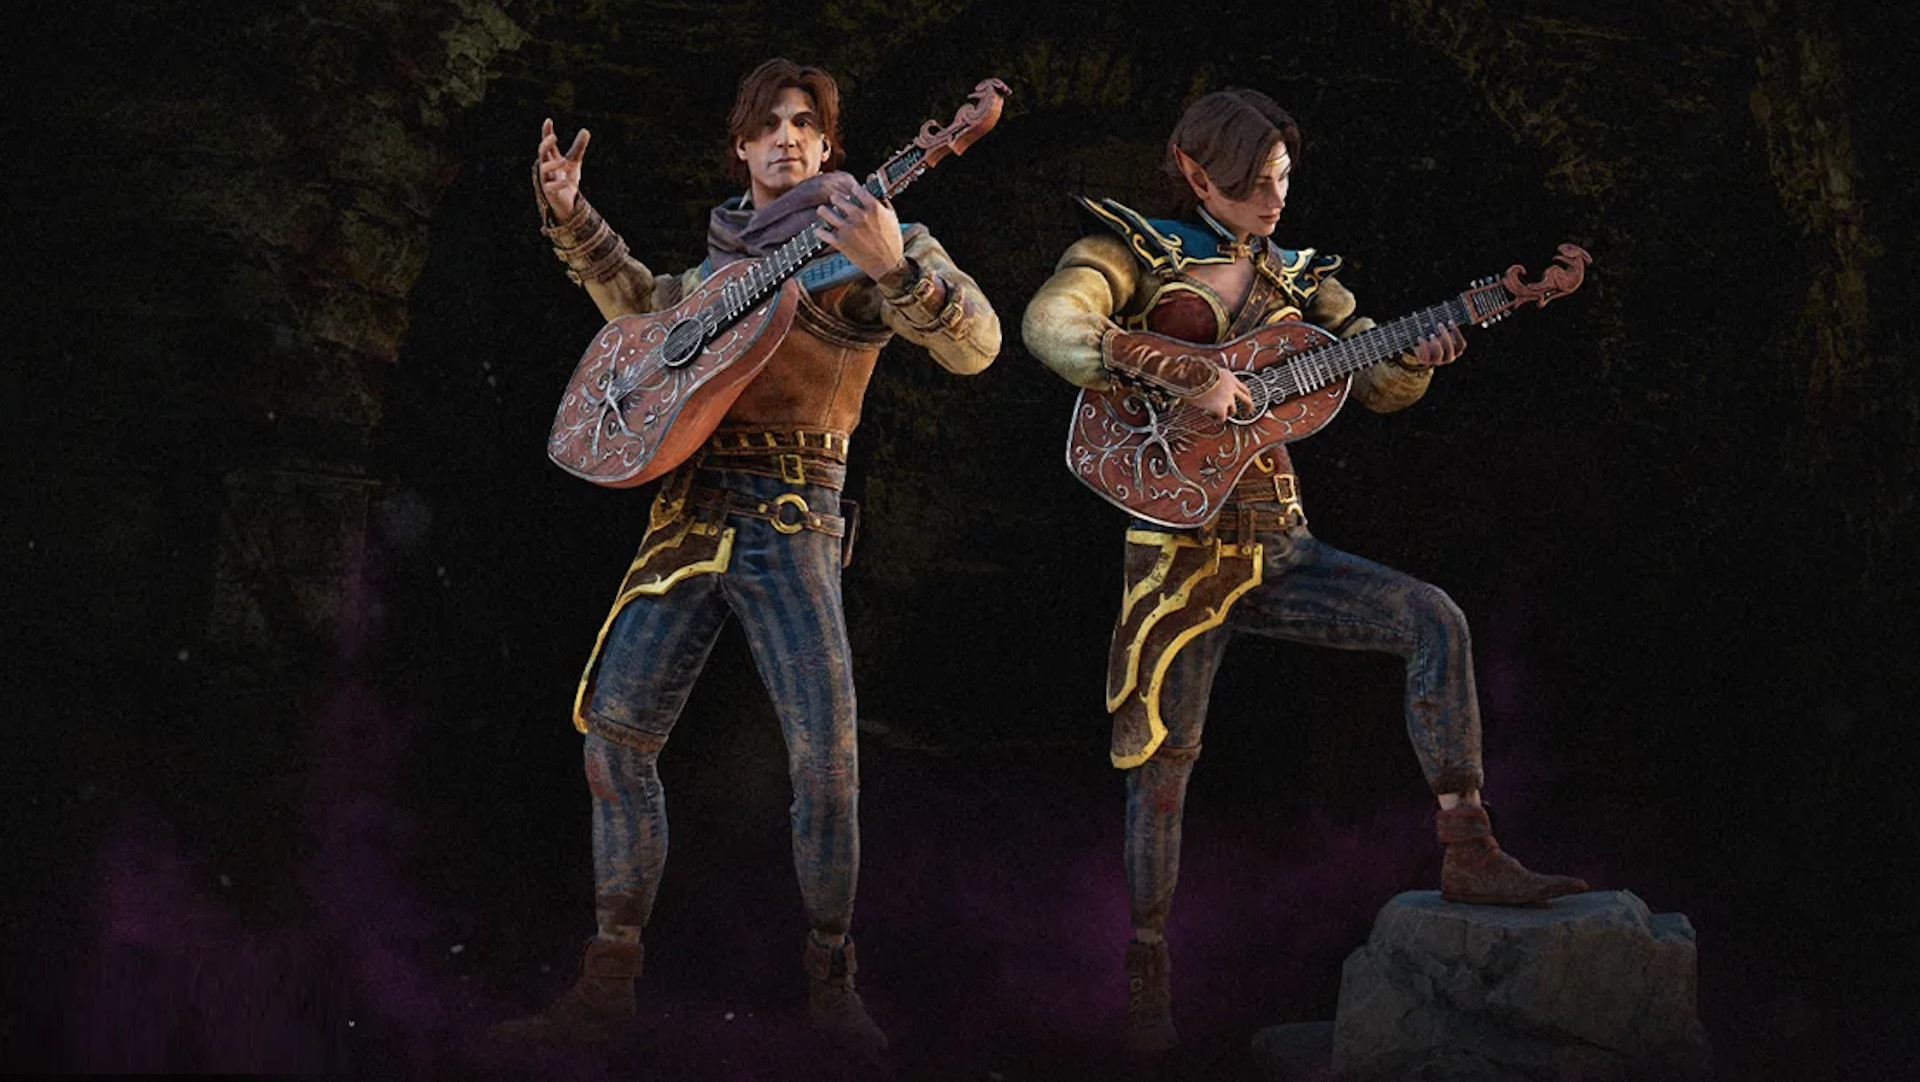 Dead by Daylight promo art: Two bards standing side by side, playing lutes